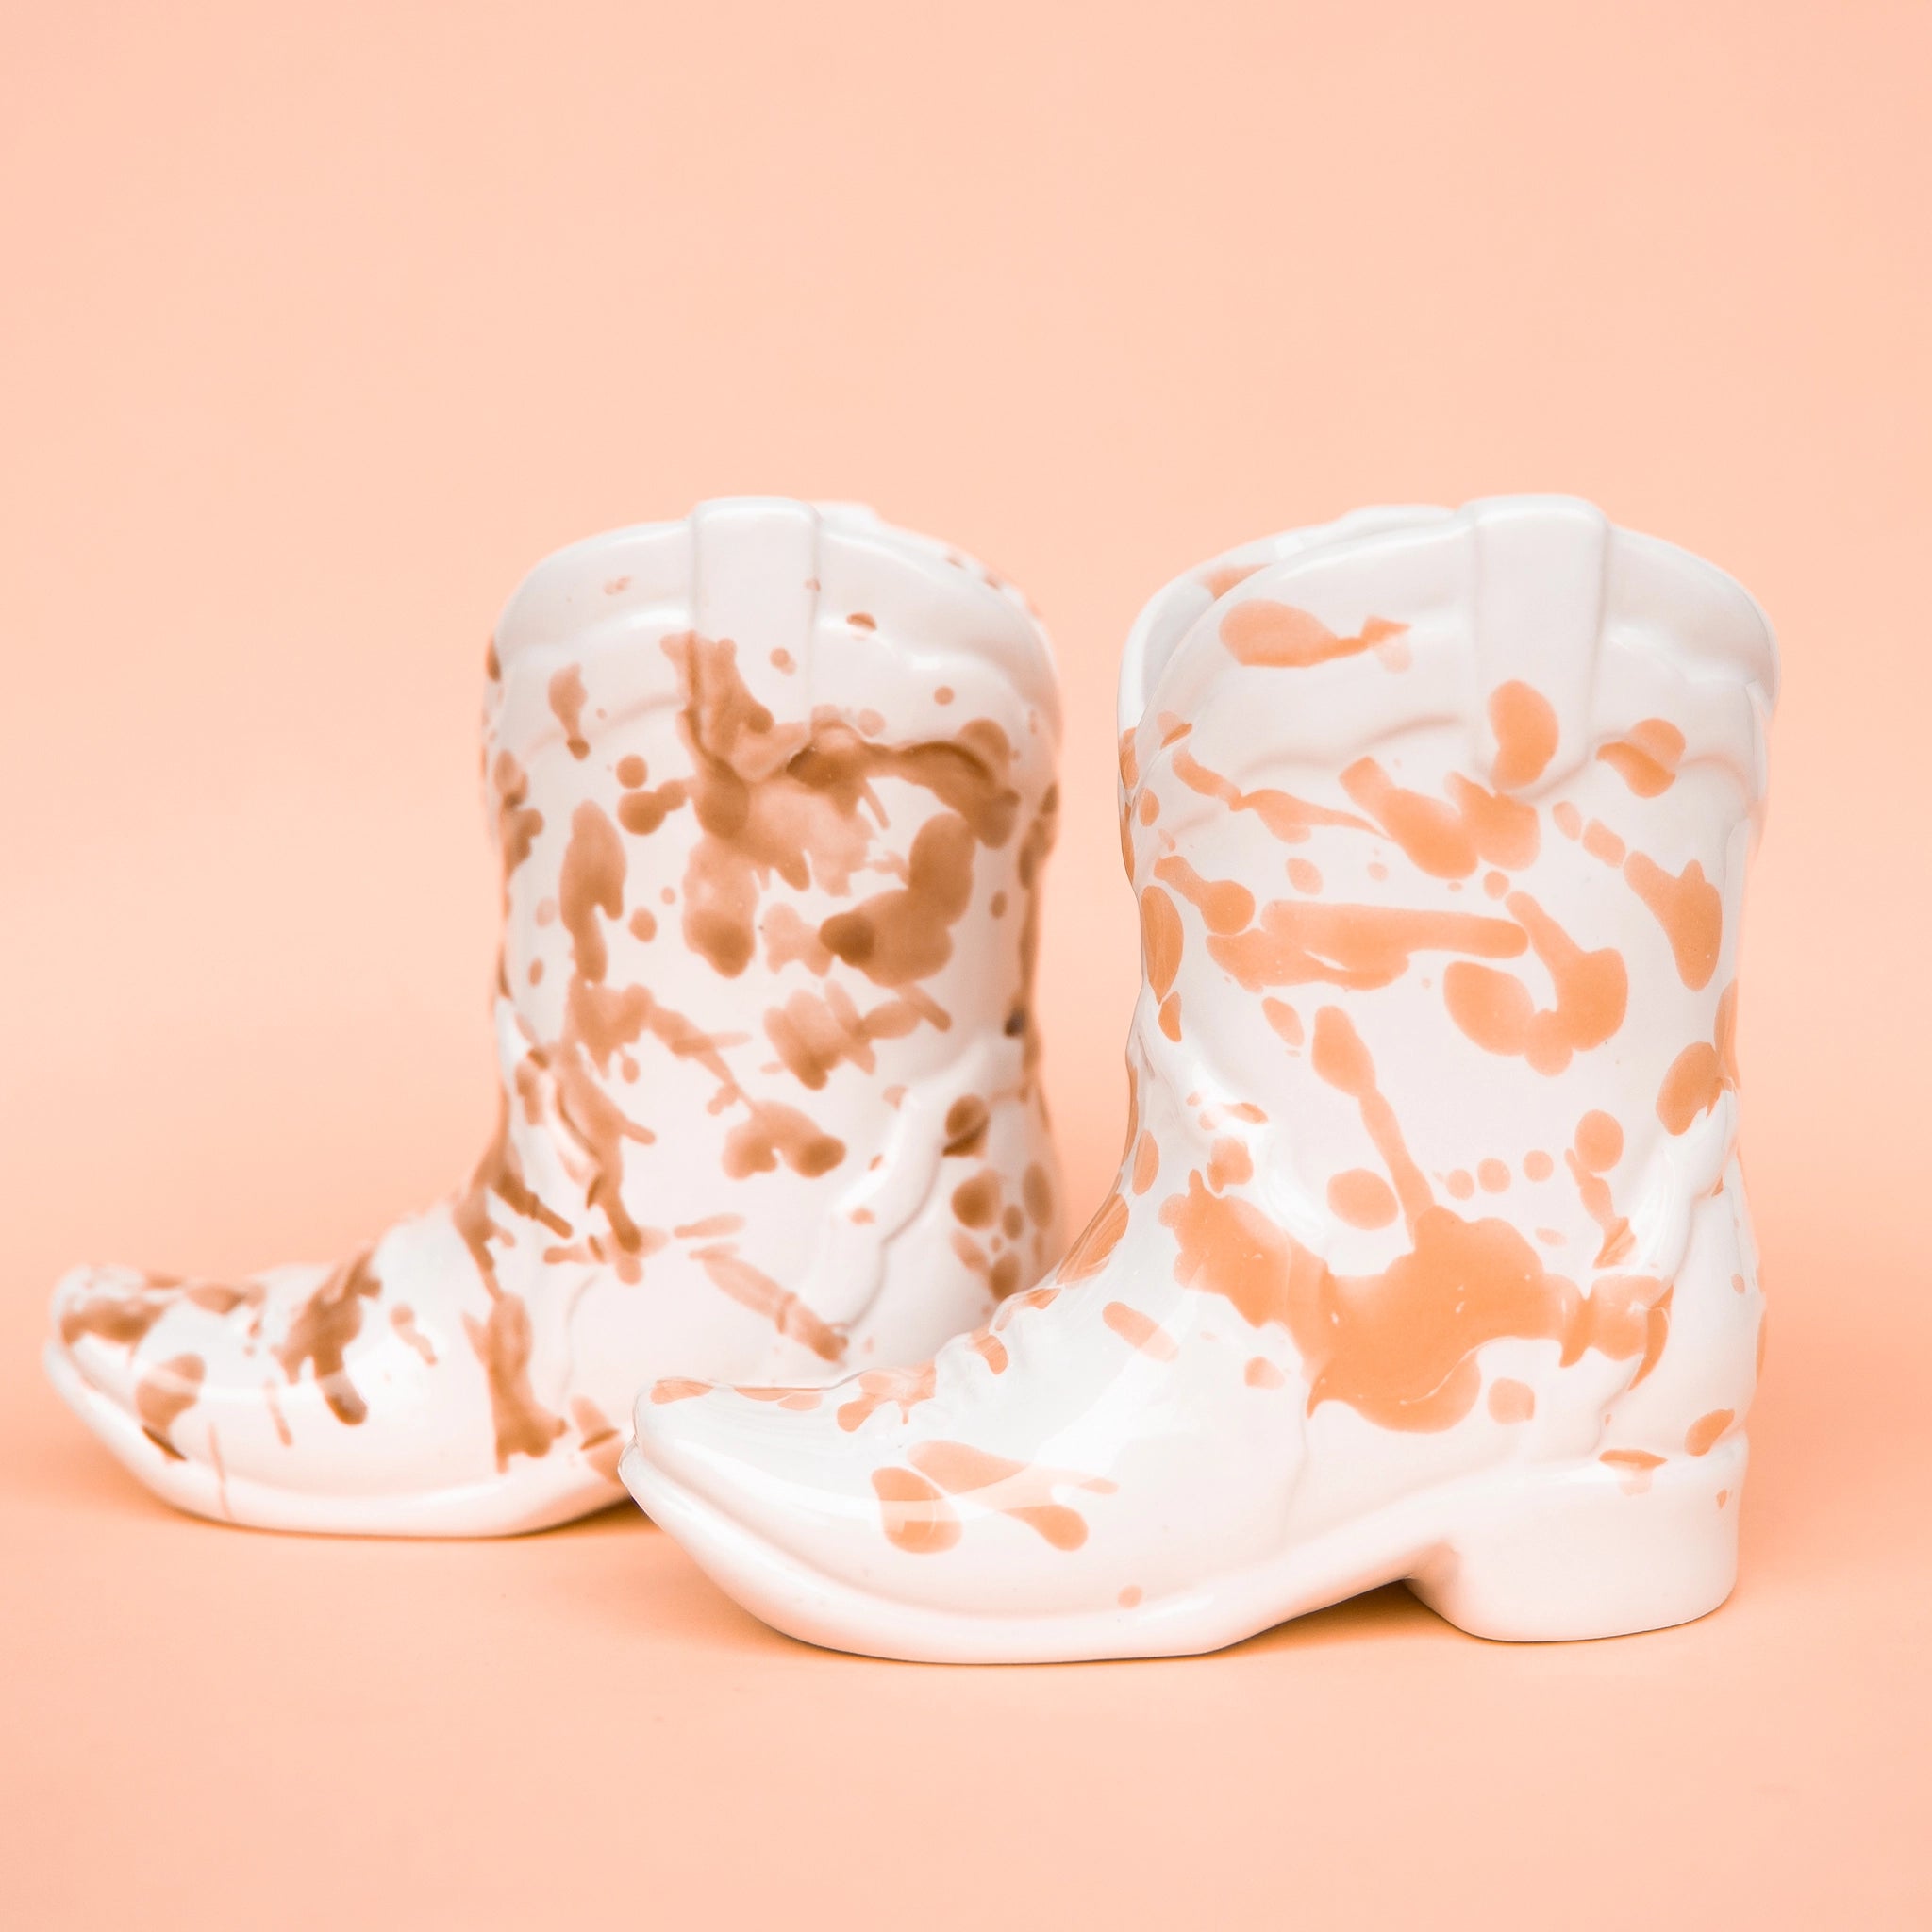 On a peachy background is two ceramic cowboy boot shaped candles with peachy and brown speckles. 